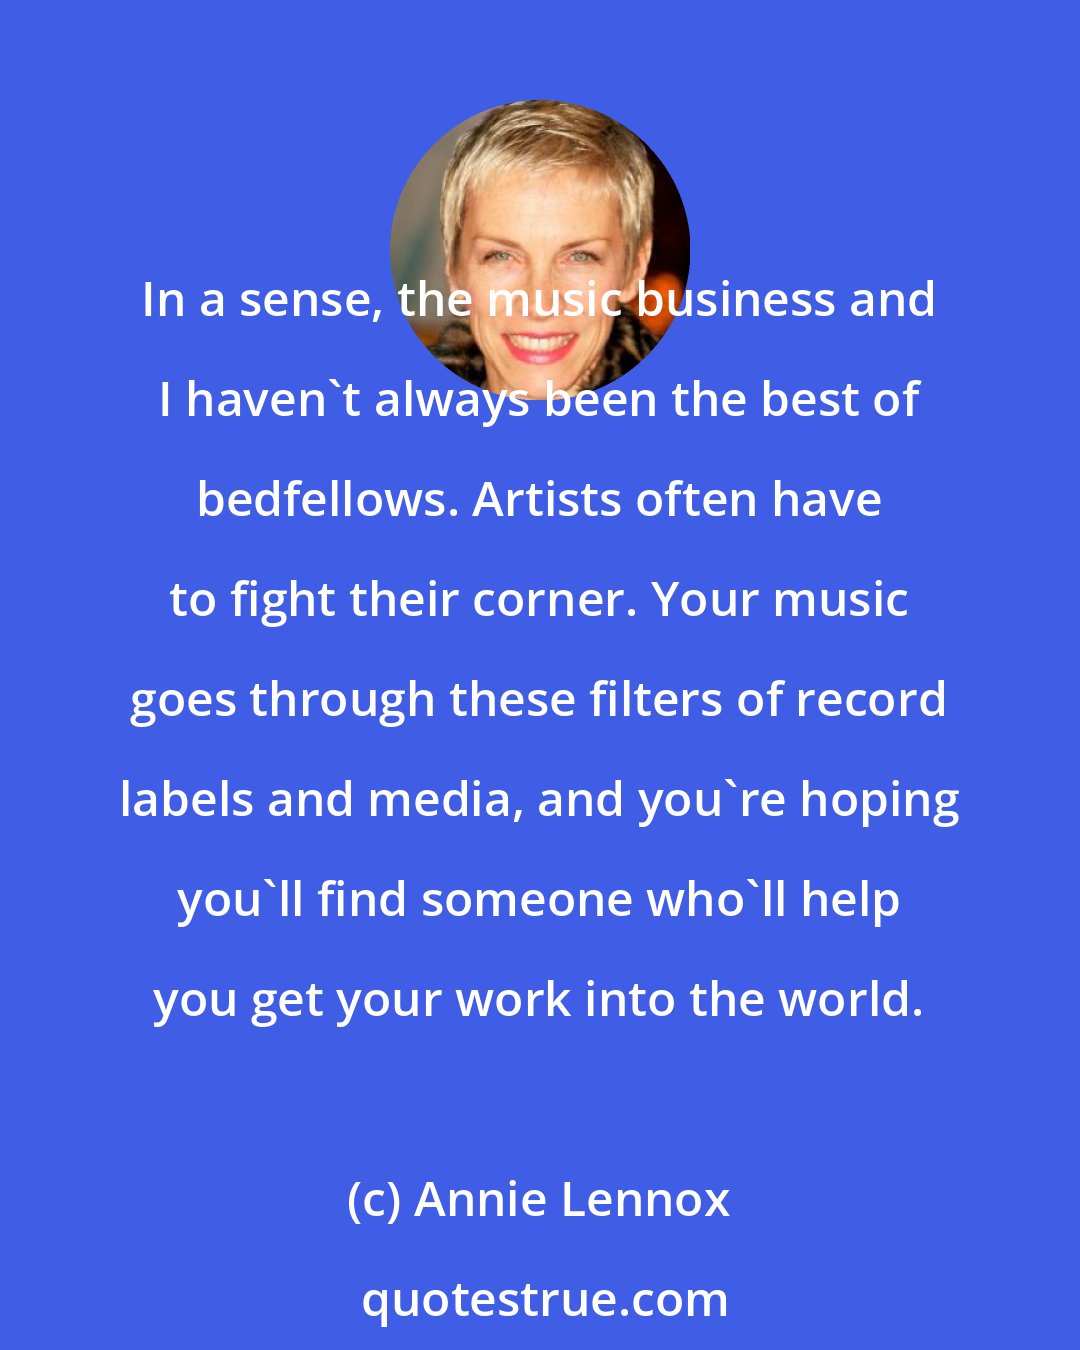 Annie Lennox: In a sense, the music business and I haven't always been the best of bedfellows. Artists often have to fight their corner. Your music goes through these filters of record labels and media, and you're hoping you'll find someone who'll help you get your work into the world.